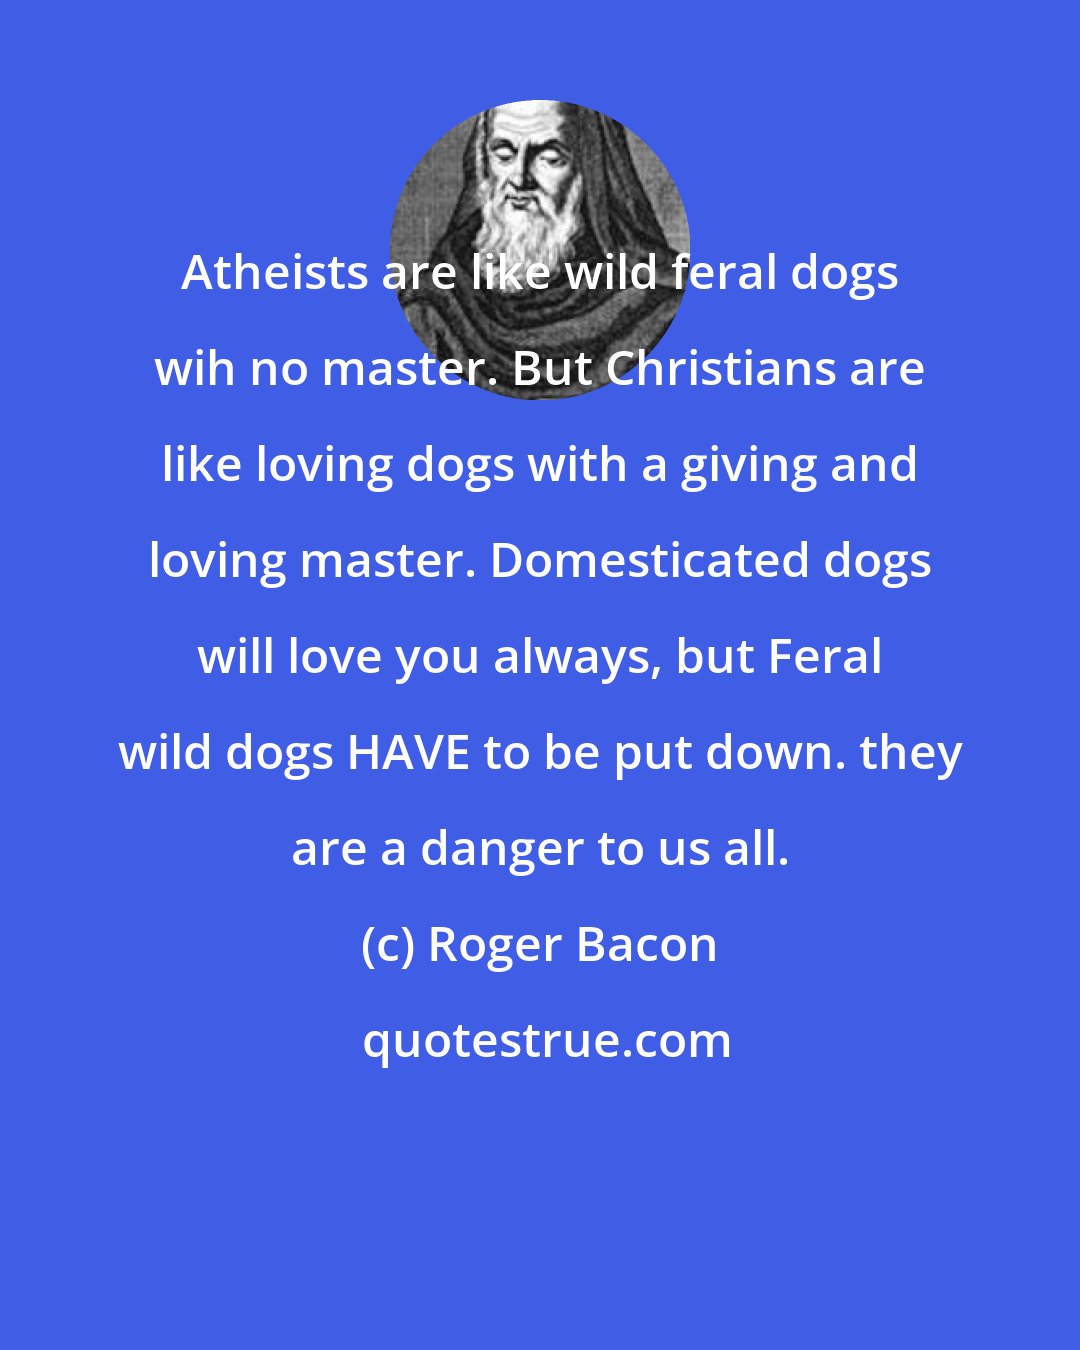 Roger Bacon: Atheists are like wild feral dogs wih no master. But Christians are like loving dogs with a giving and loving master. Domesticated dogs will love you always, but Feral wild dogs HAVE to be put down. they are a danger to us all.